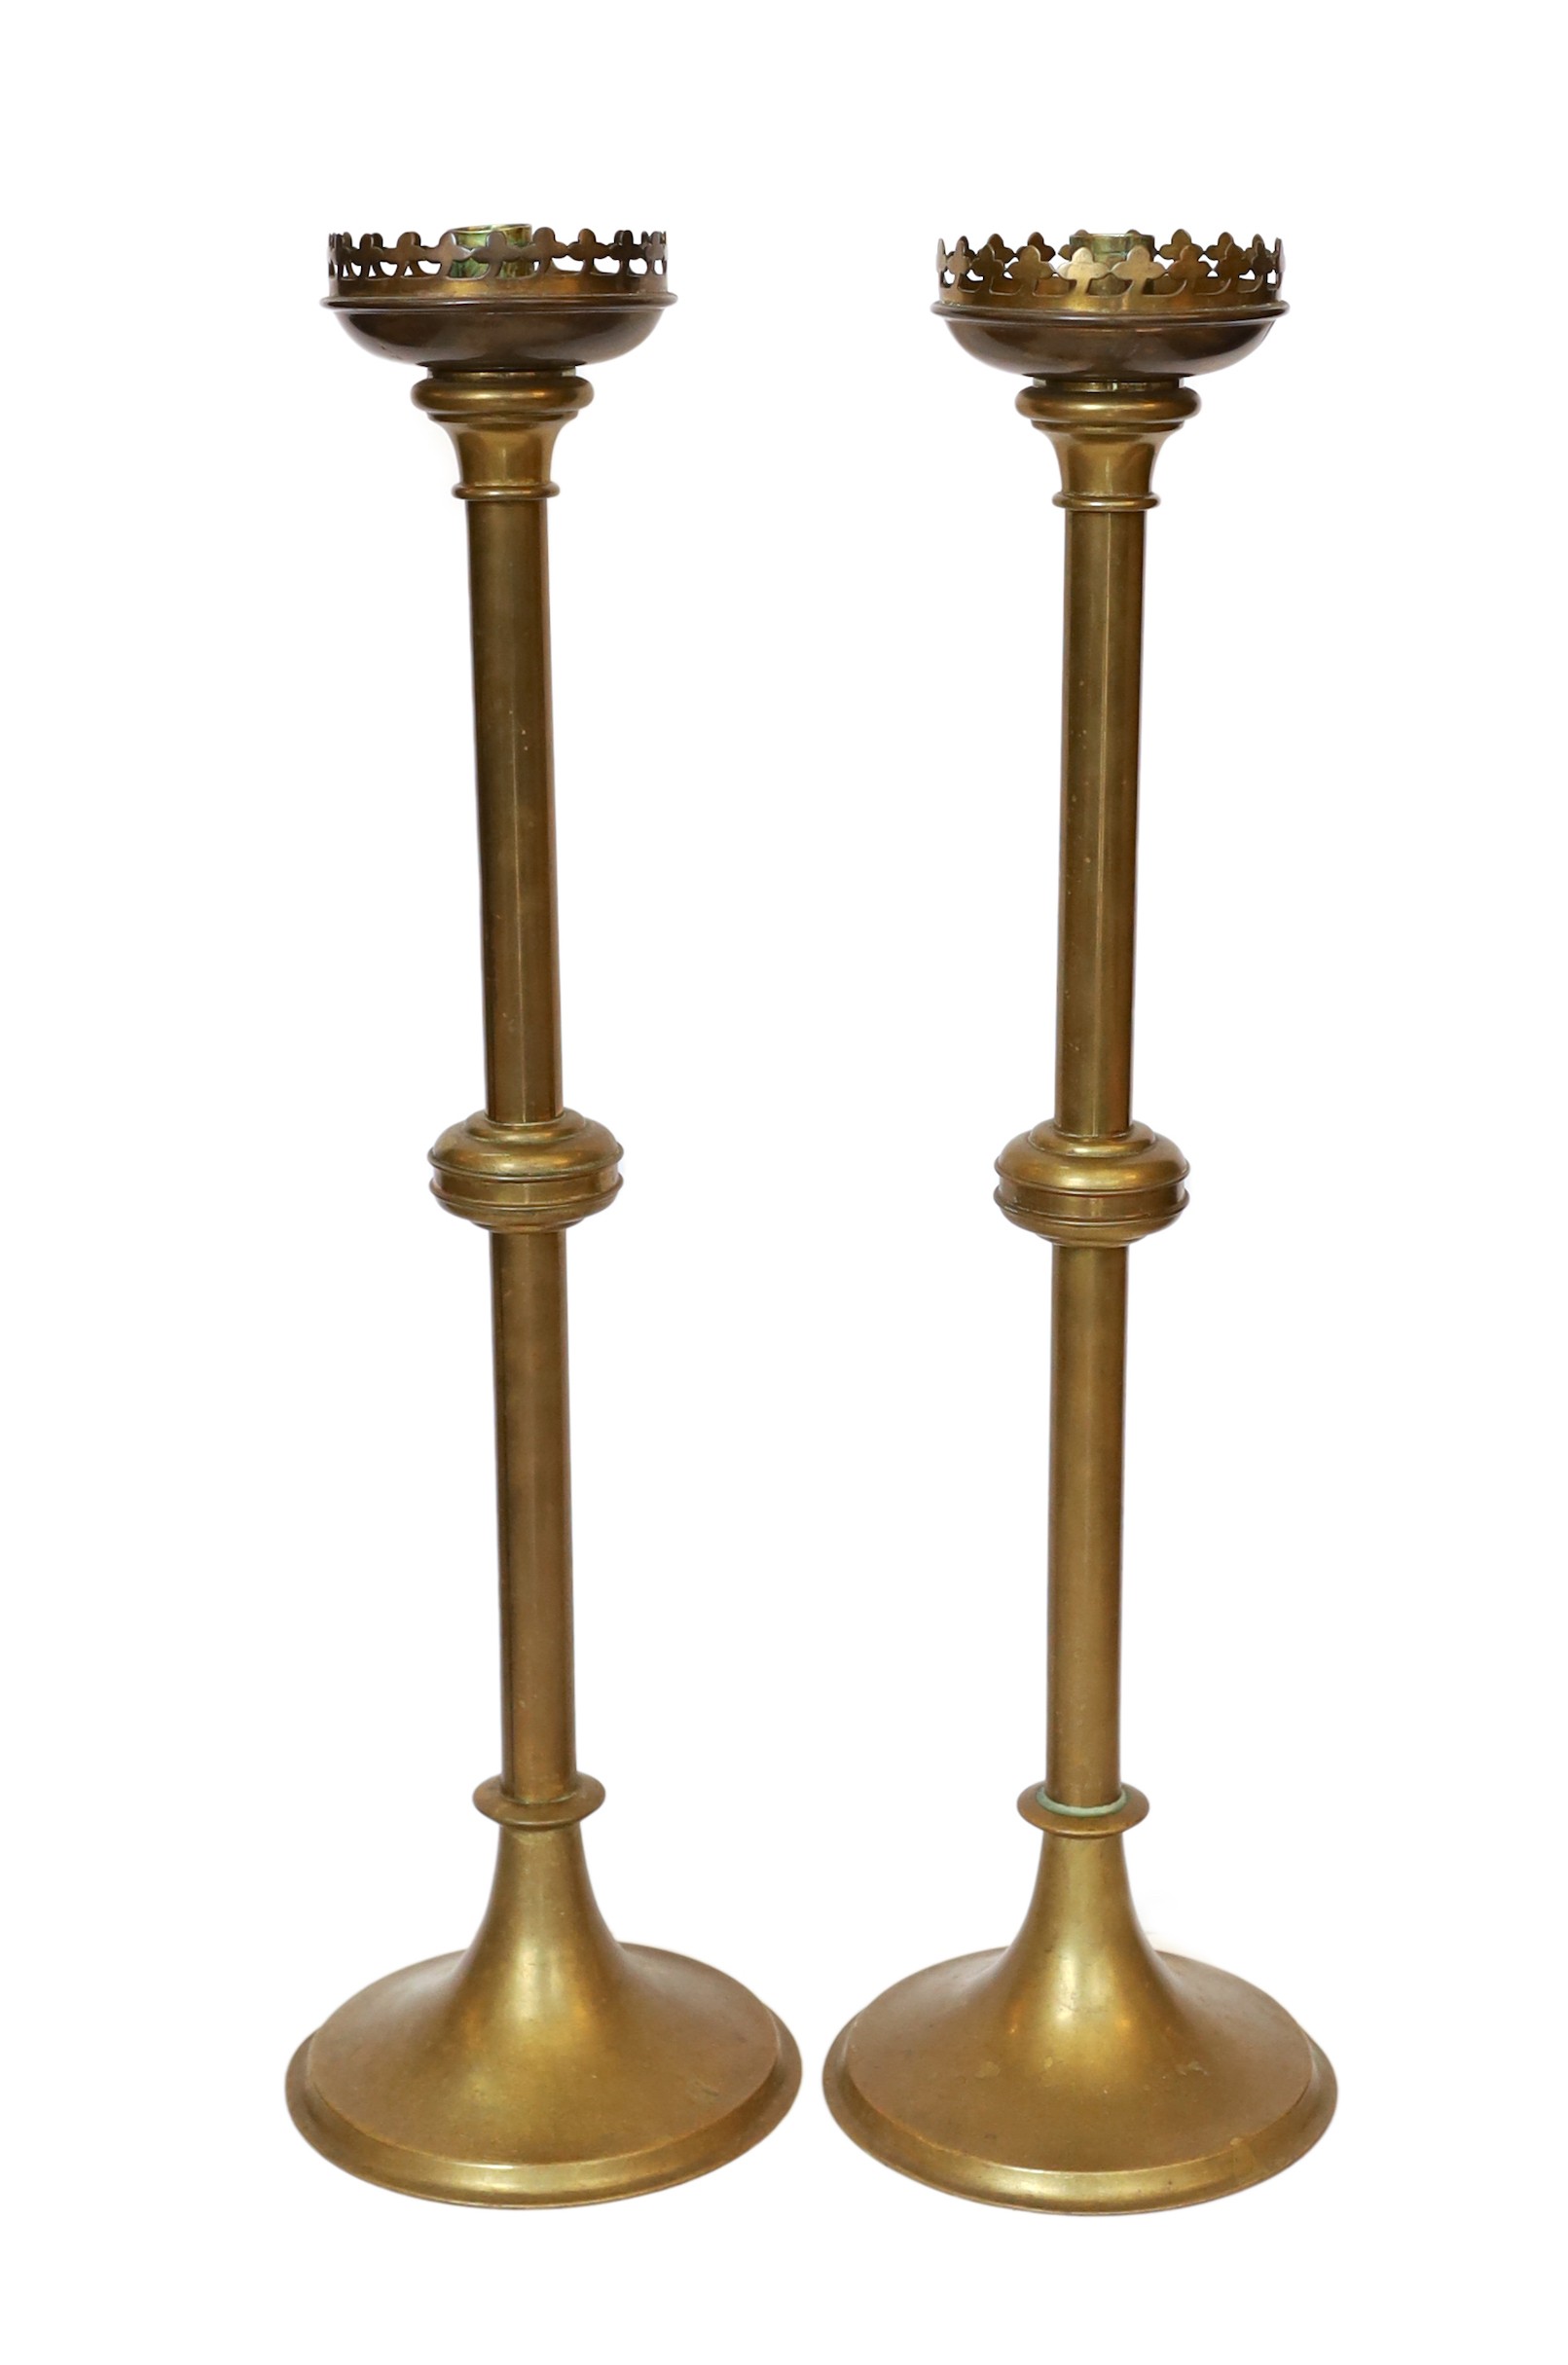 A pair of early 20th century English brass altar sticks, height 61cm